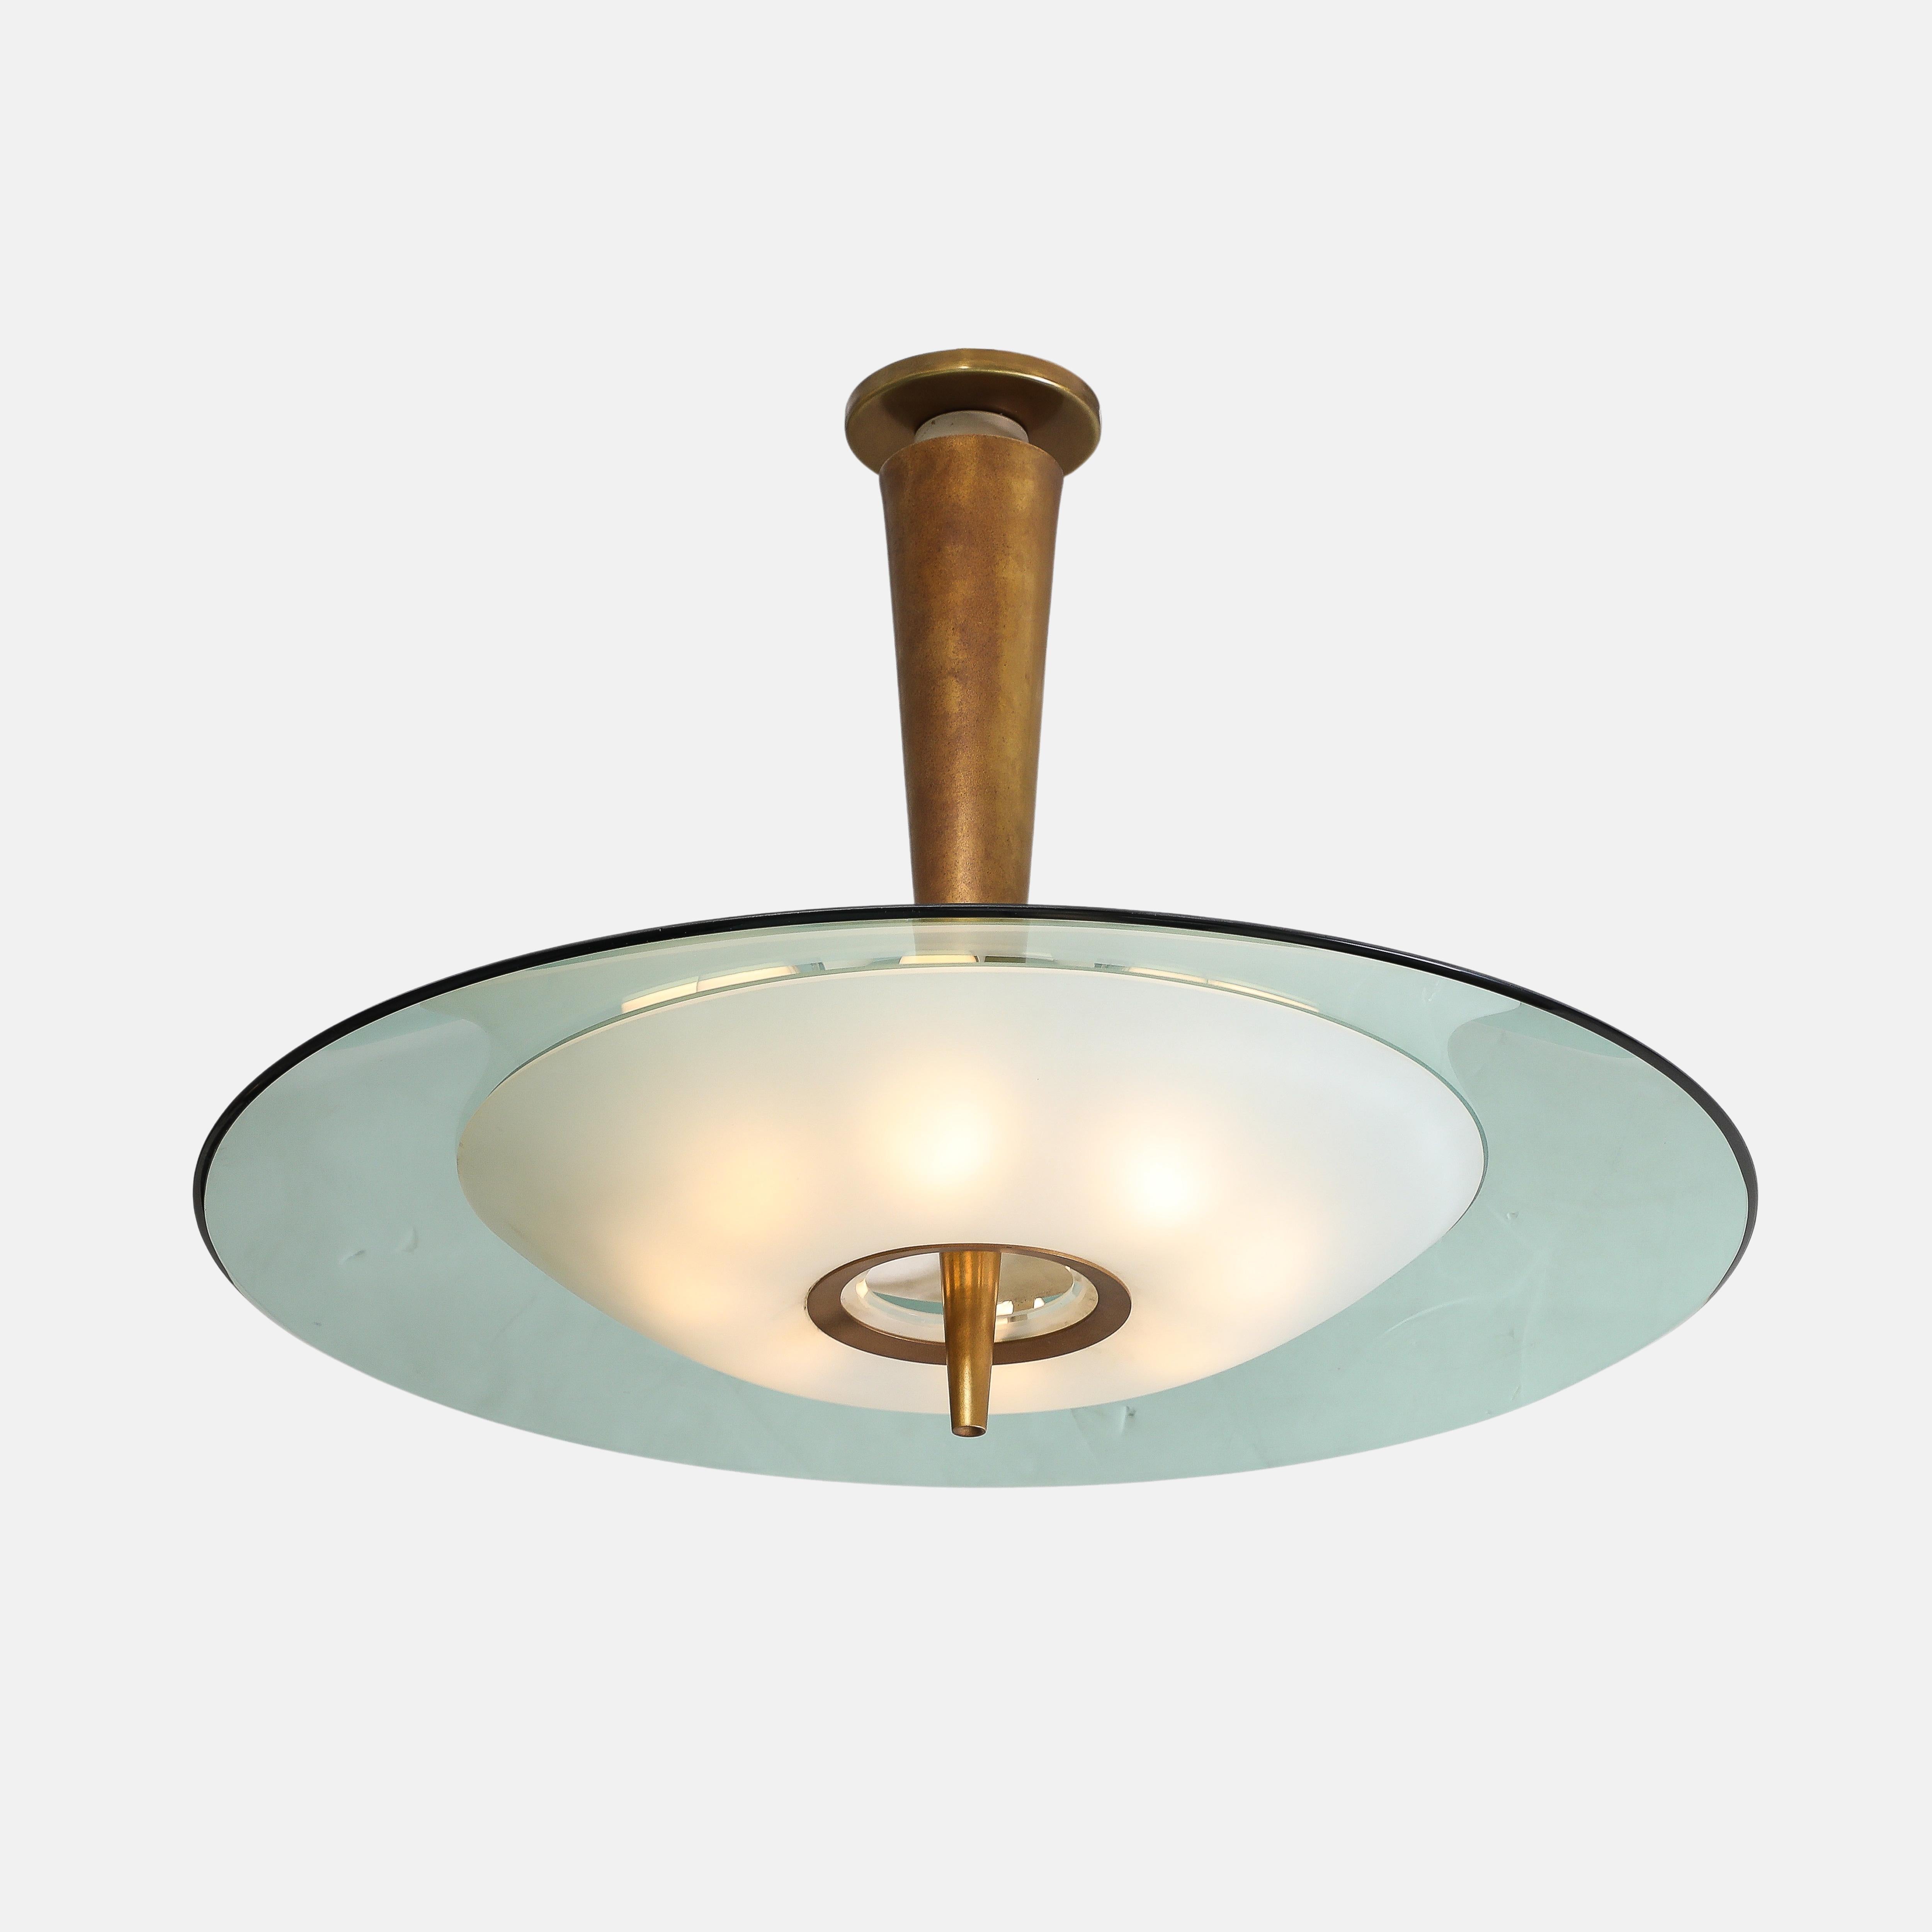 Max Ingrand for Fontana Arte chandelier or pendant light model 1462 consisting of large colored, beveled and polished crystal glass disc and smaller frosted glass diffuser mounted on tapering lacquered brass stem.  
This exquisite ceiling light has